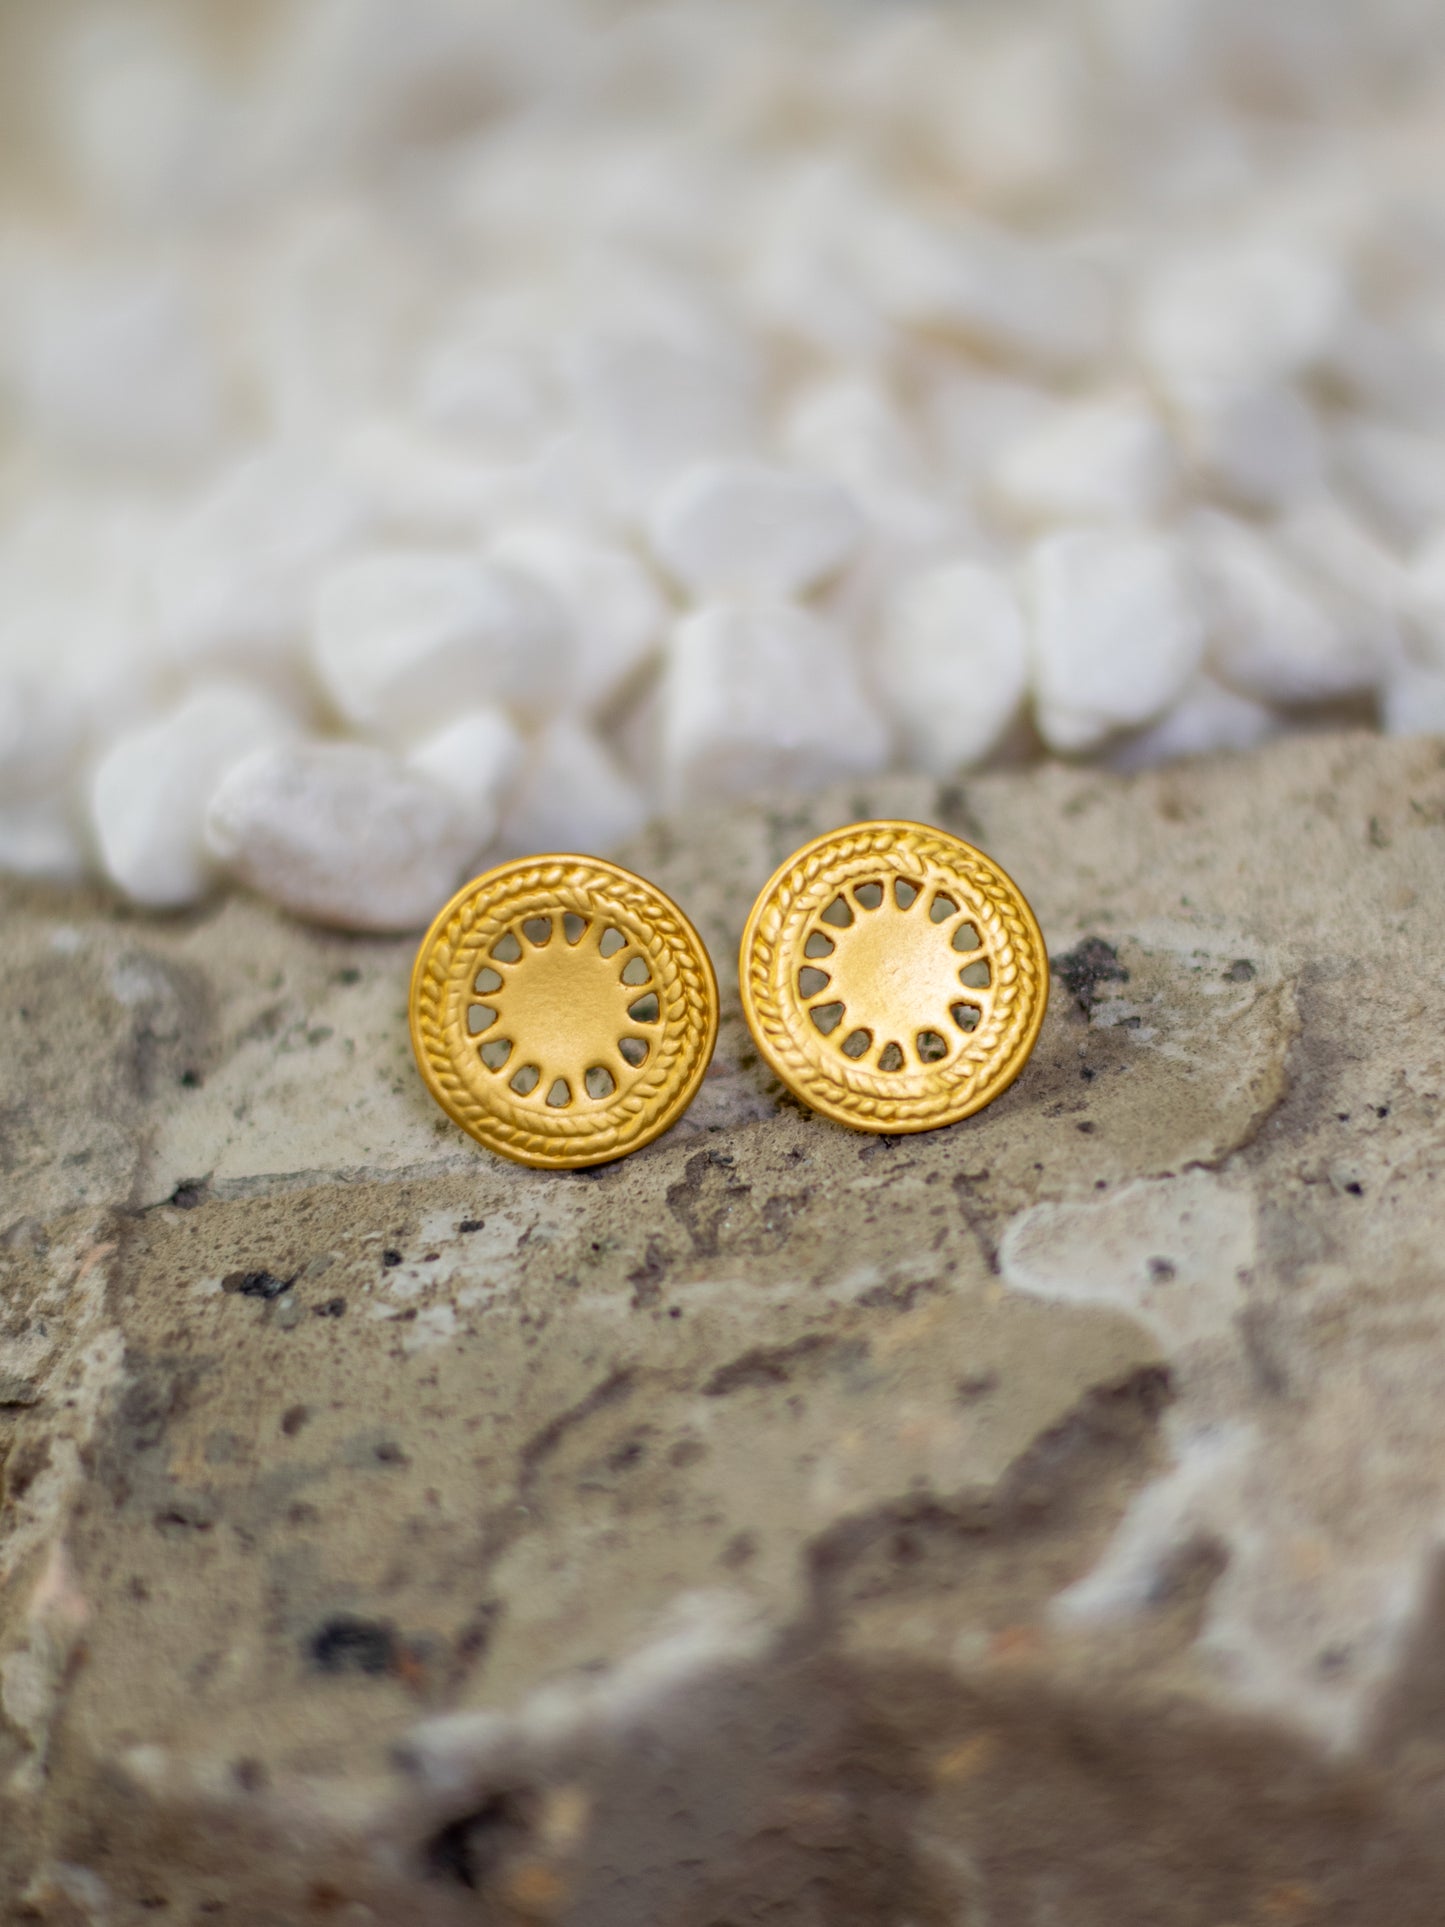 24K Gold Plated Pre-Columbian Muisca Pattern Round Earrings.